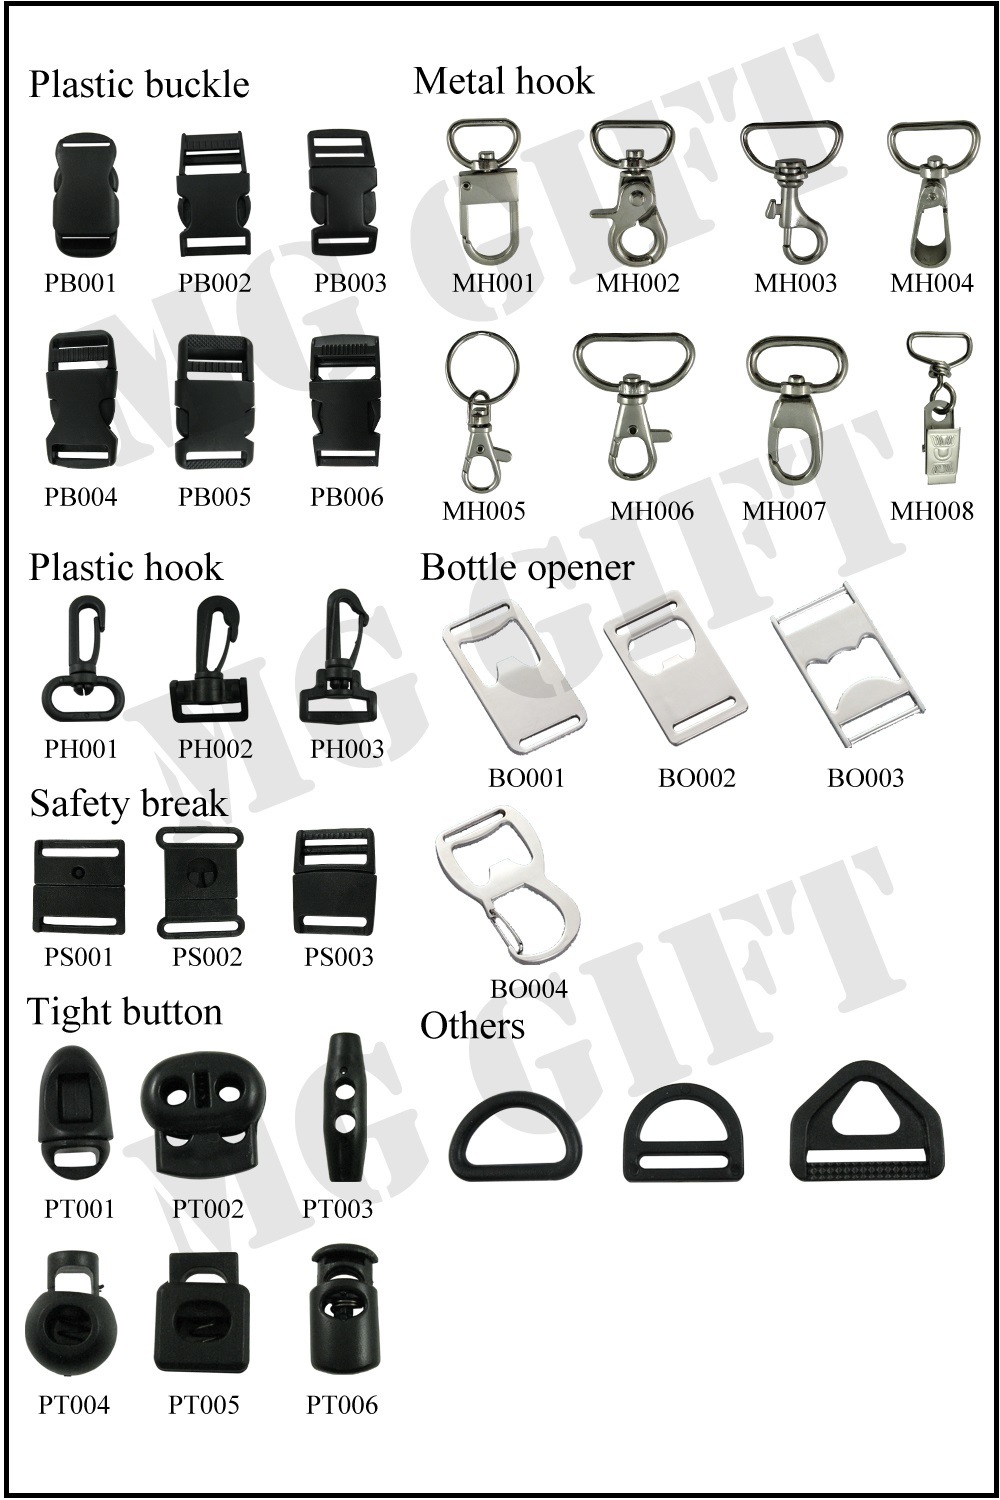 Hot Sales Customized Printed Lanyard Ribbon with Plastic Buckle